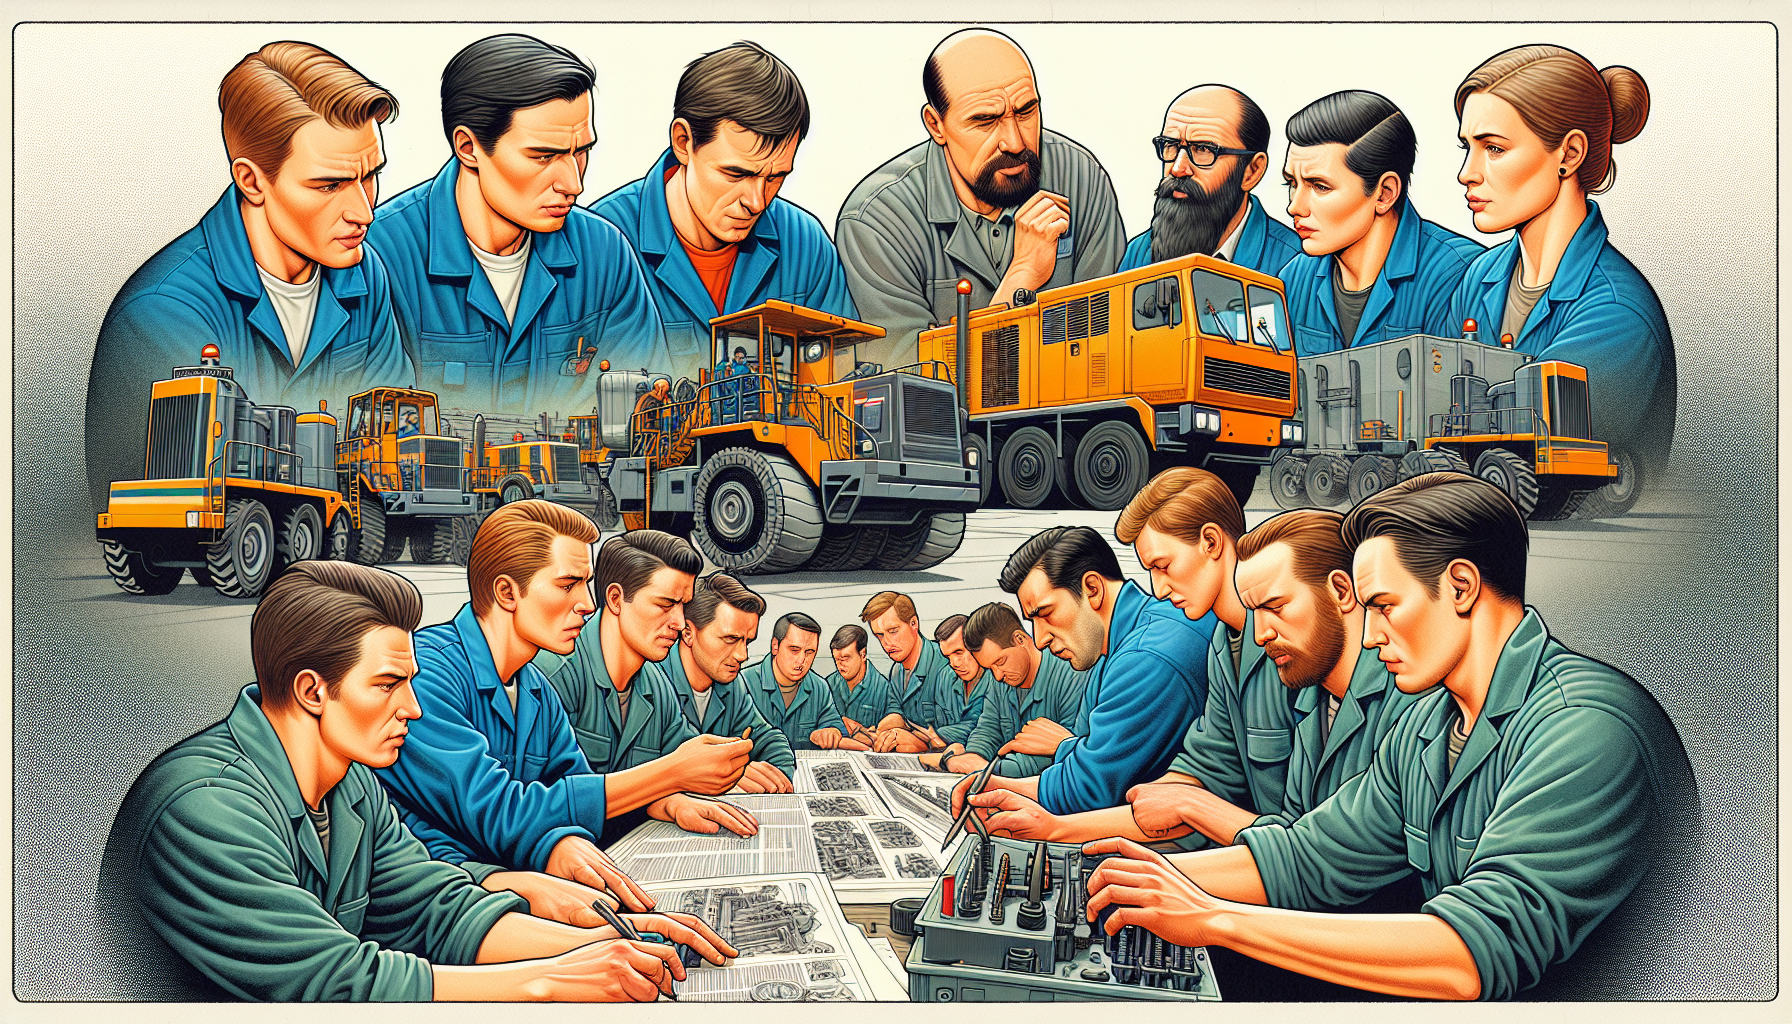 Illustration of a training session for machine operators with safety emphasis